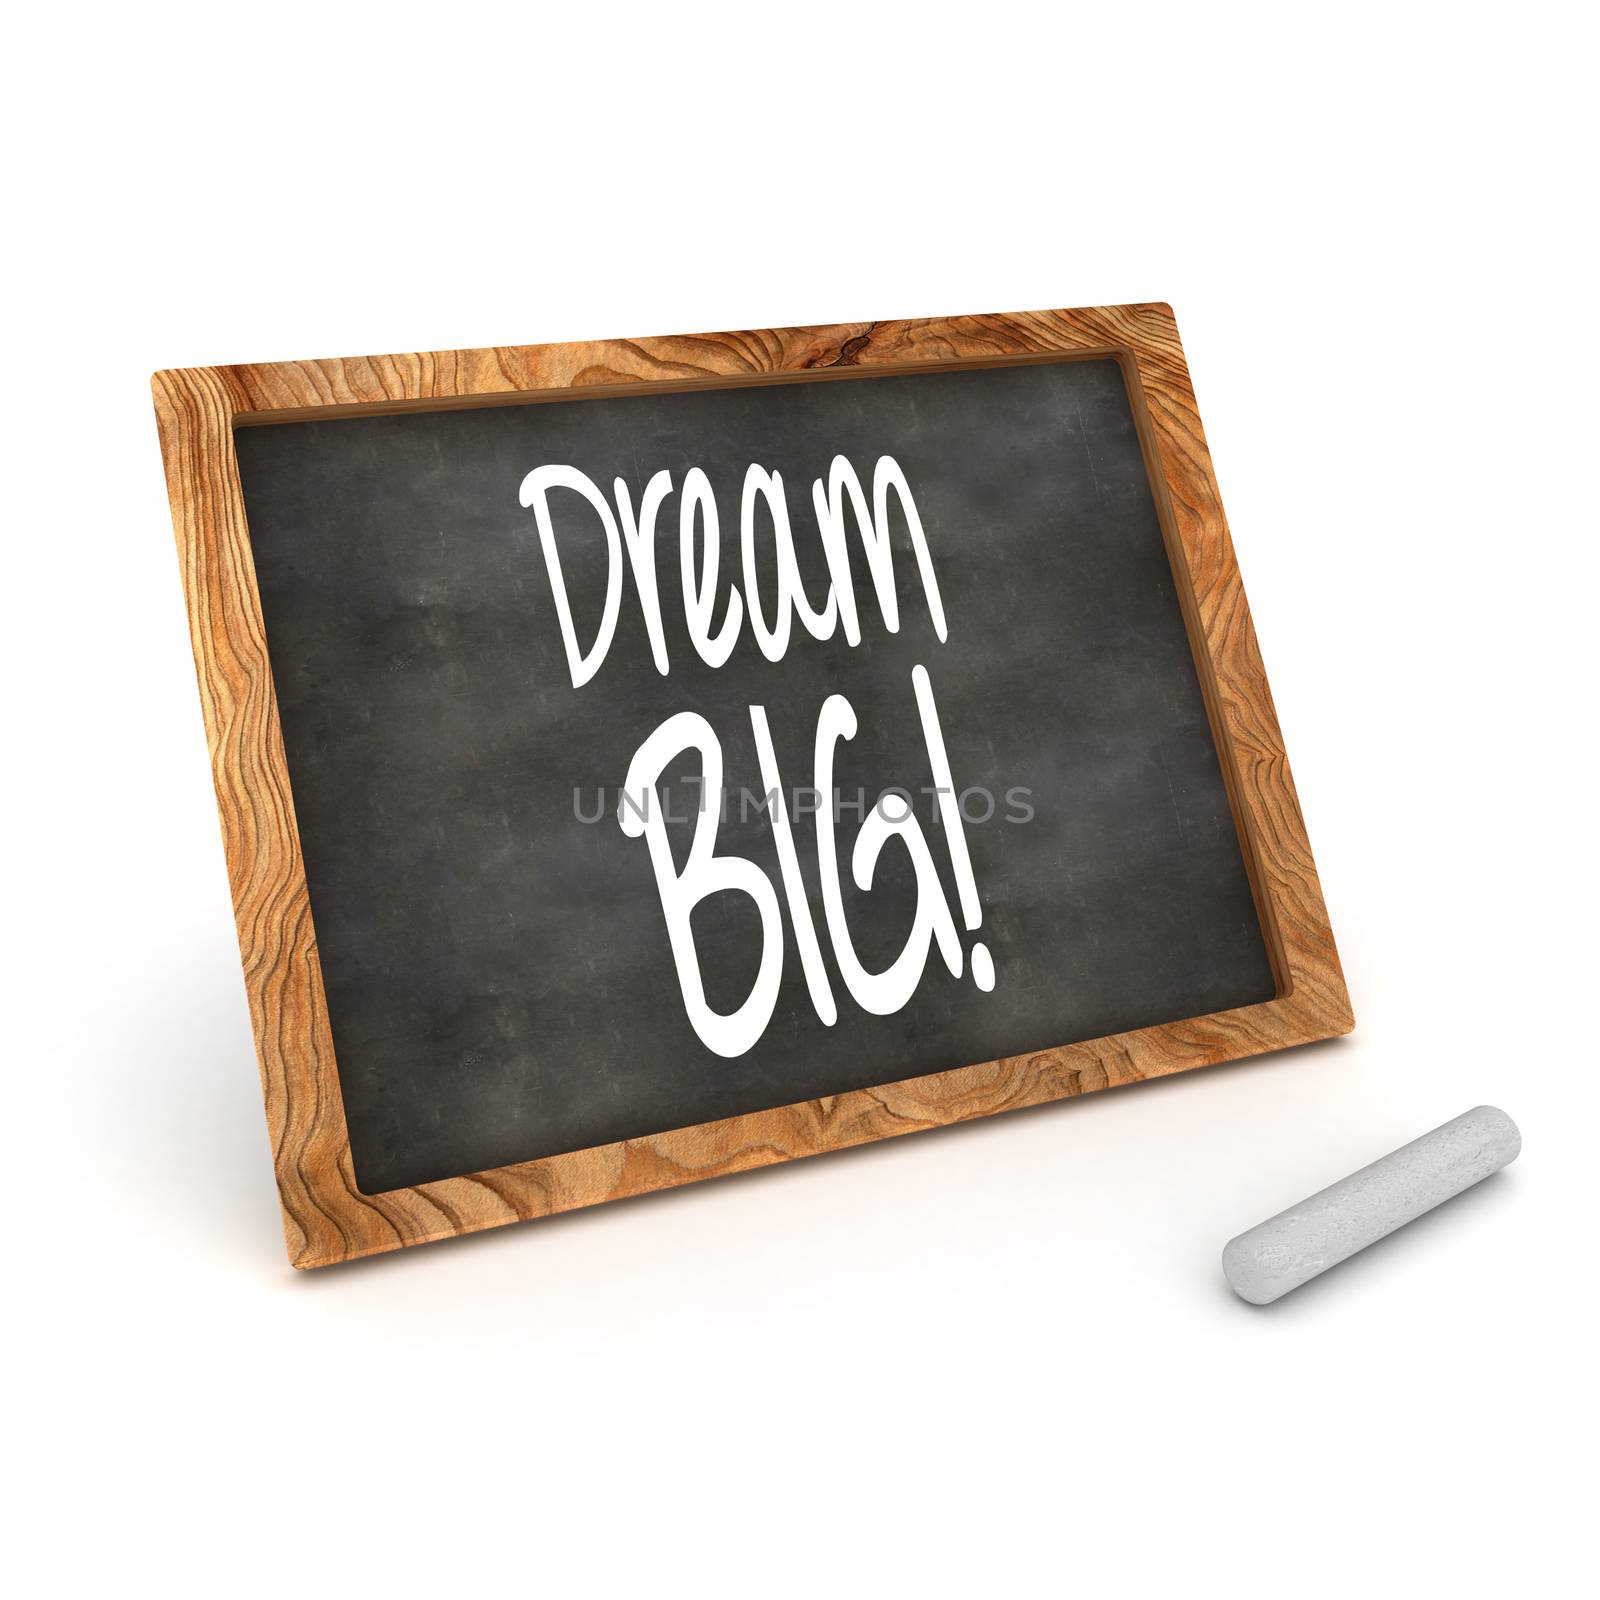 A Colourful 3d Rendered Blackboard showing the Inspirational Message "Dream Big"